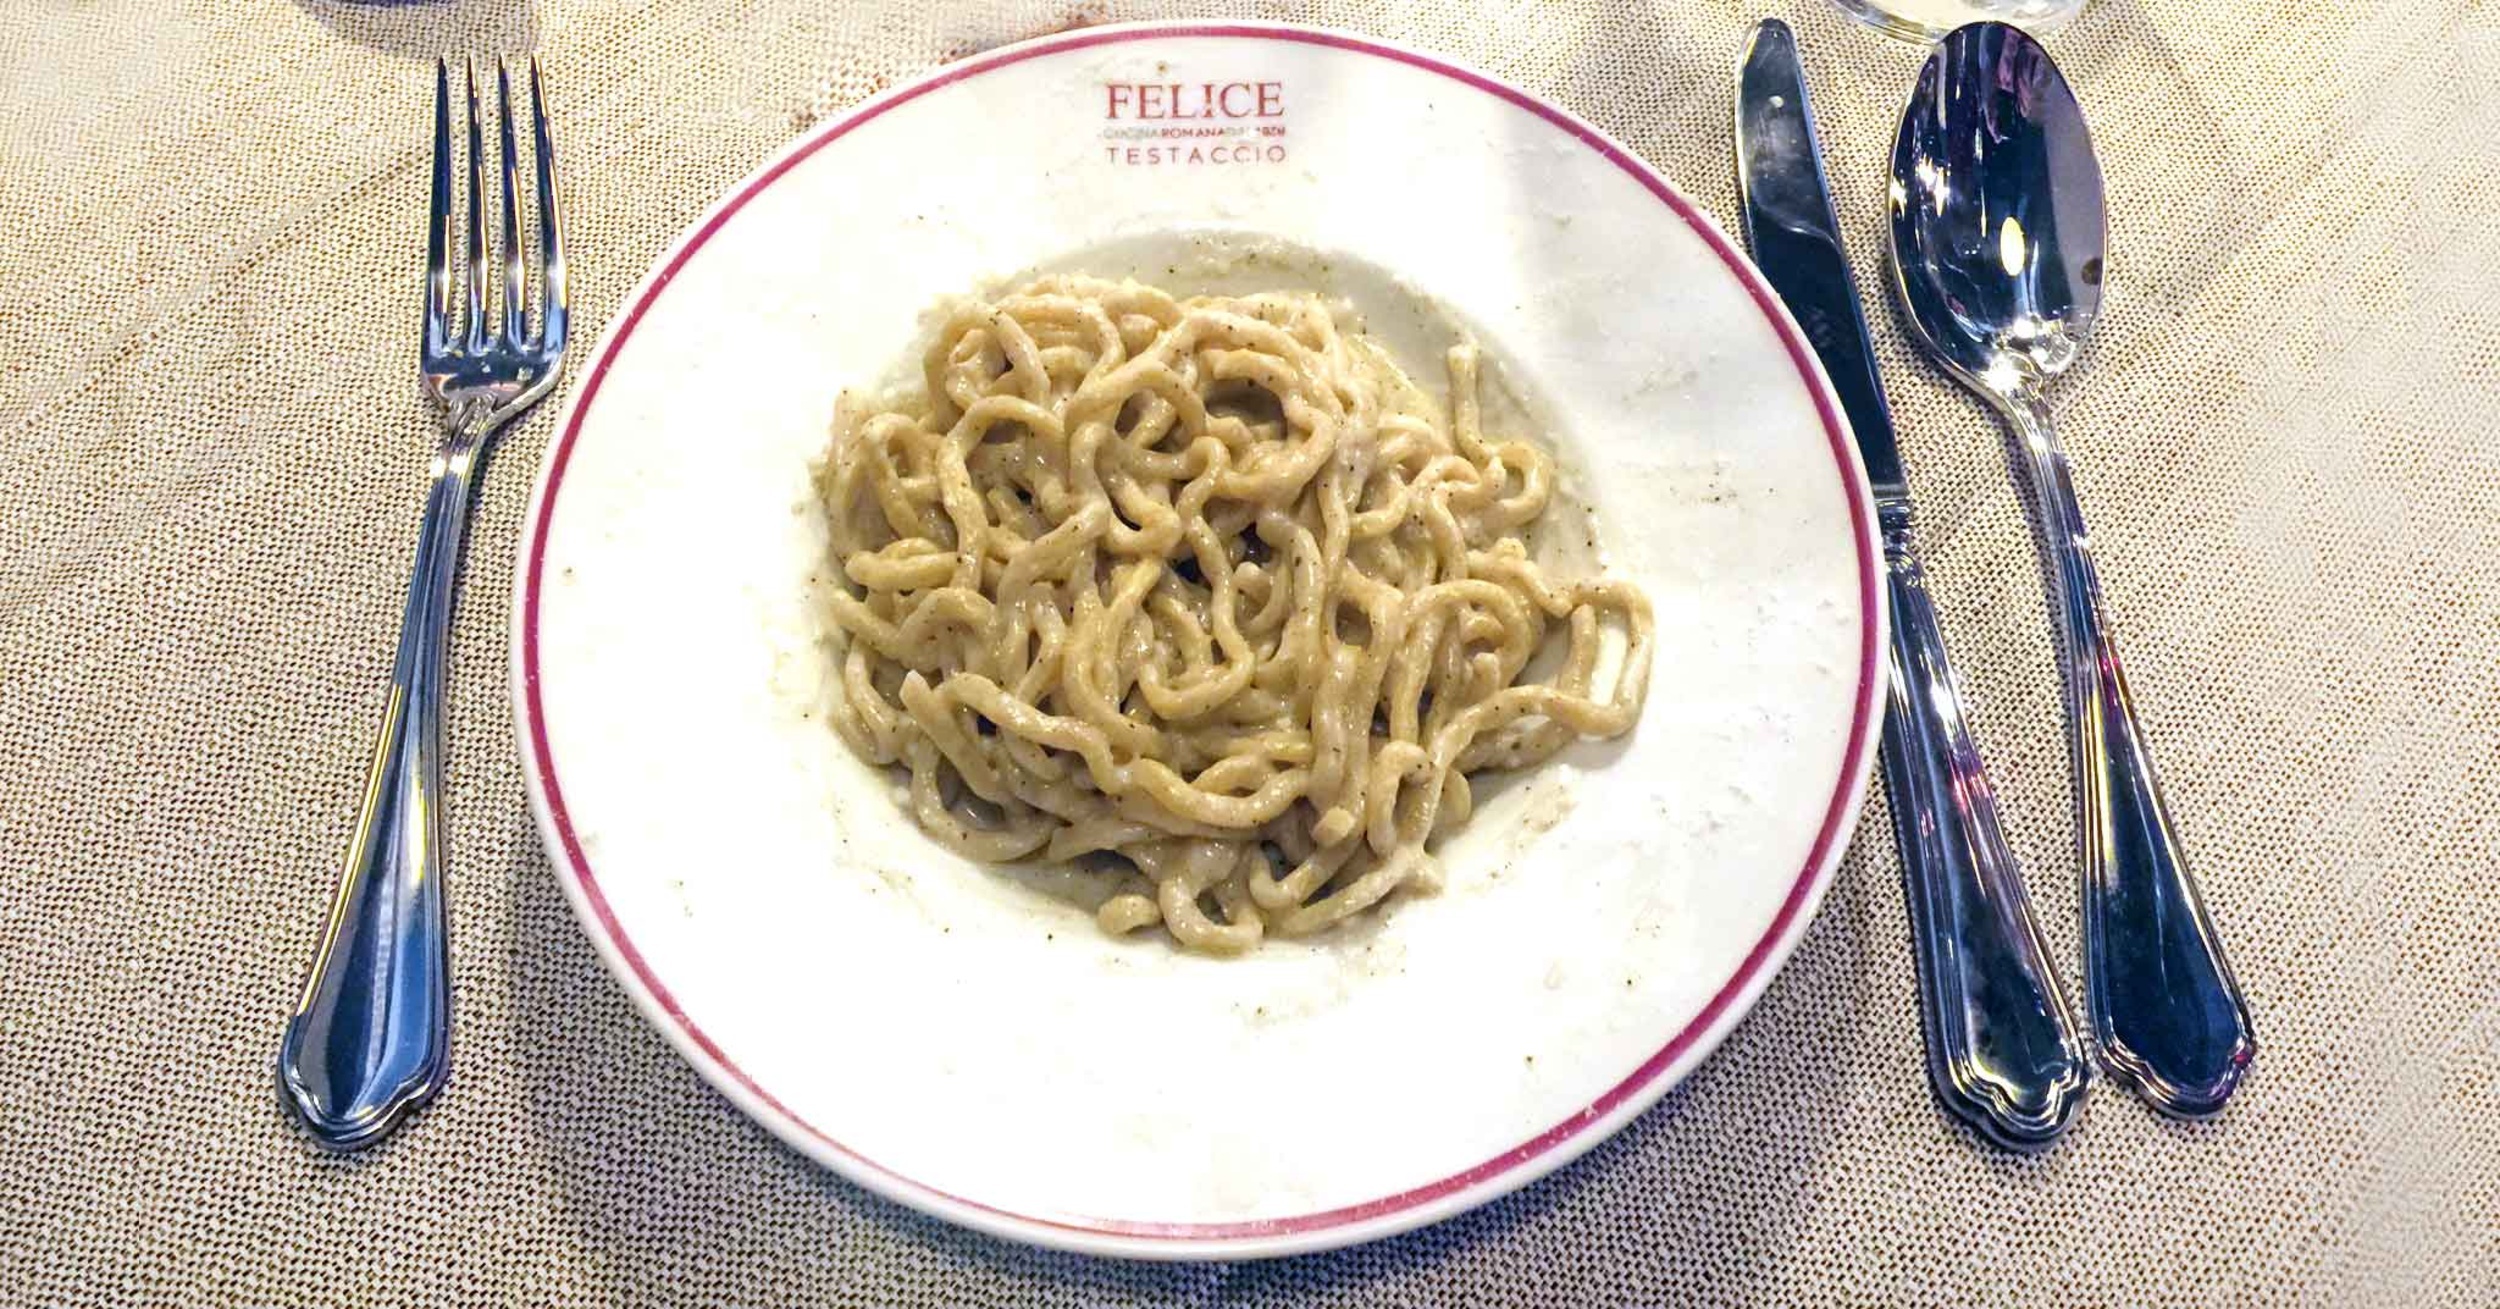 <p>Did we mention Rome might have invented cacio e pepe? Whether the stories are true or not, the city's restaurants all serve their own version of this signature dish. The best place to order one of these plates is at Felice a Testaccio, which prepares the pasta in front of you and has graciously located itself outside of town. You're going to need a long walk after this one. </p><p>You may also like: <a href='https://www.yardbarker.com/lifestyle/articles/20_spinach_recipes_you_absolutely_must_try/s1__37331000'>20 spinach recipes you absolutely must try</a></p>